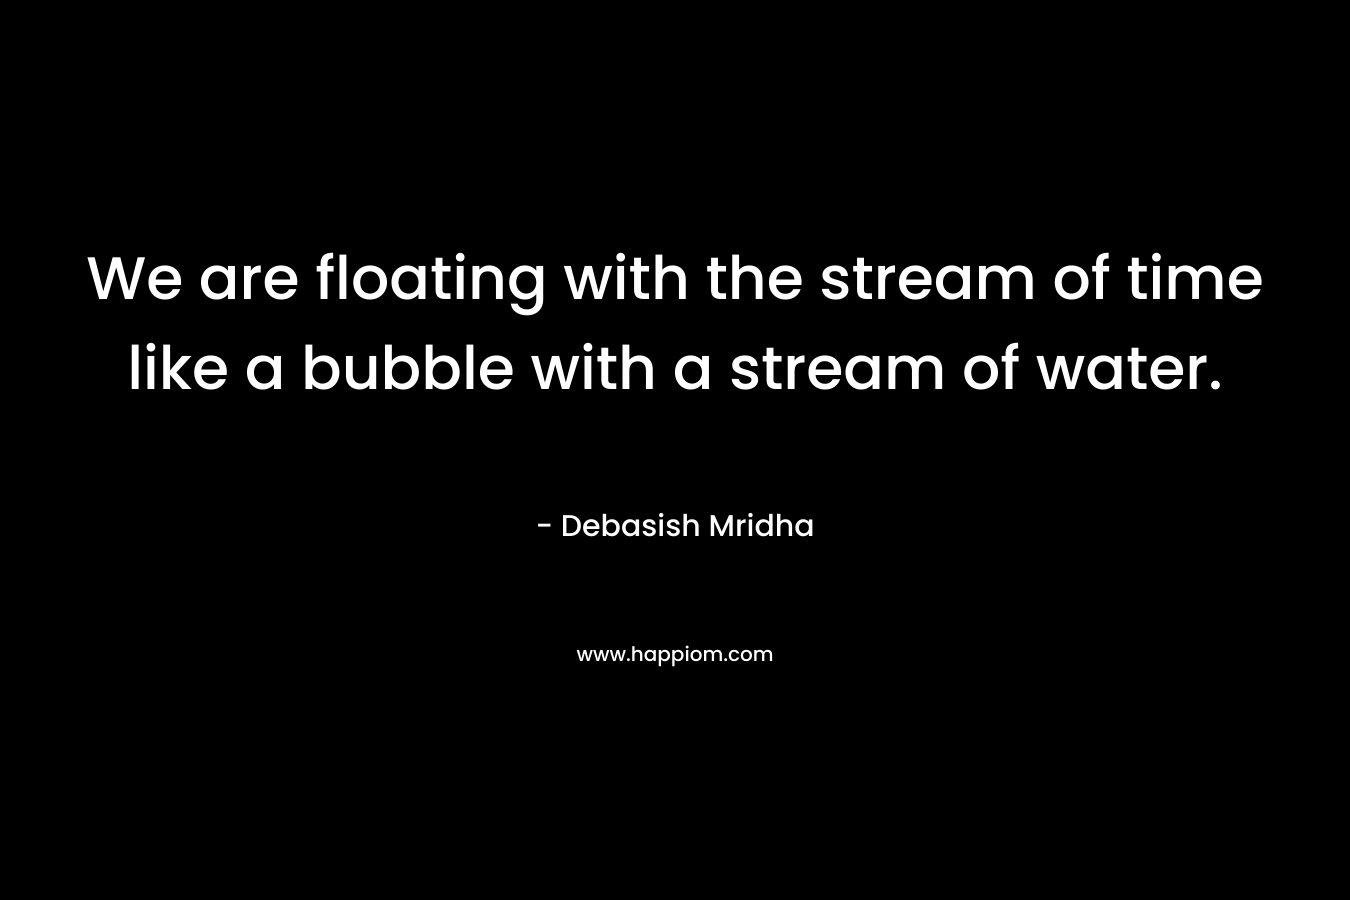 We are floating with the stream of time like a bubble with a stream of water. – Debasish Mridha